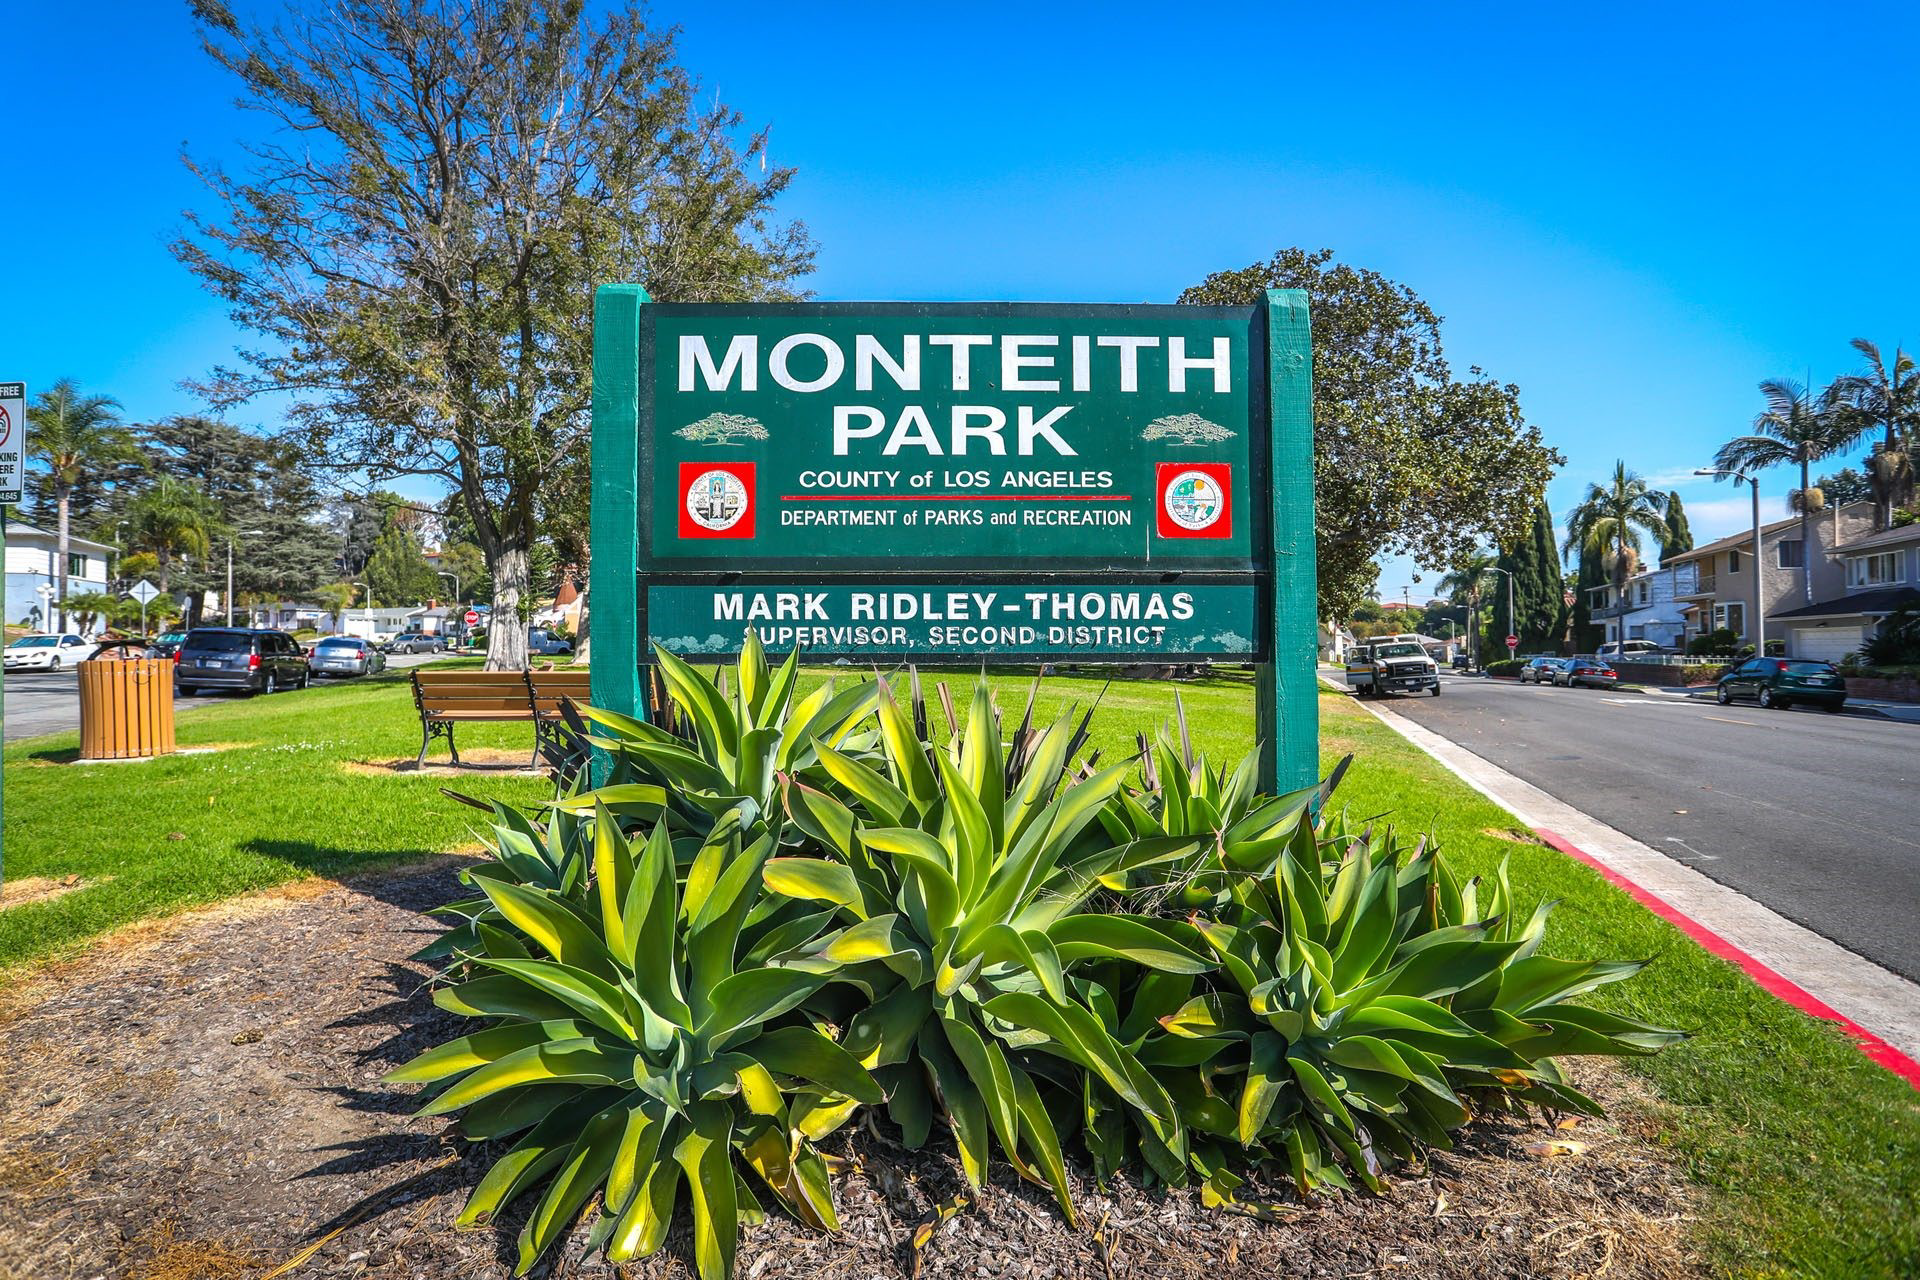 Monteith Park